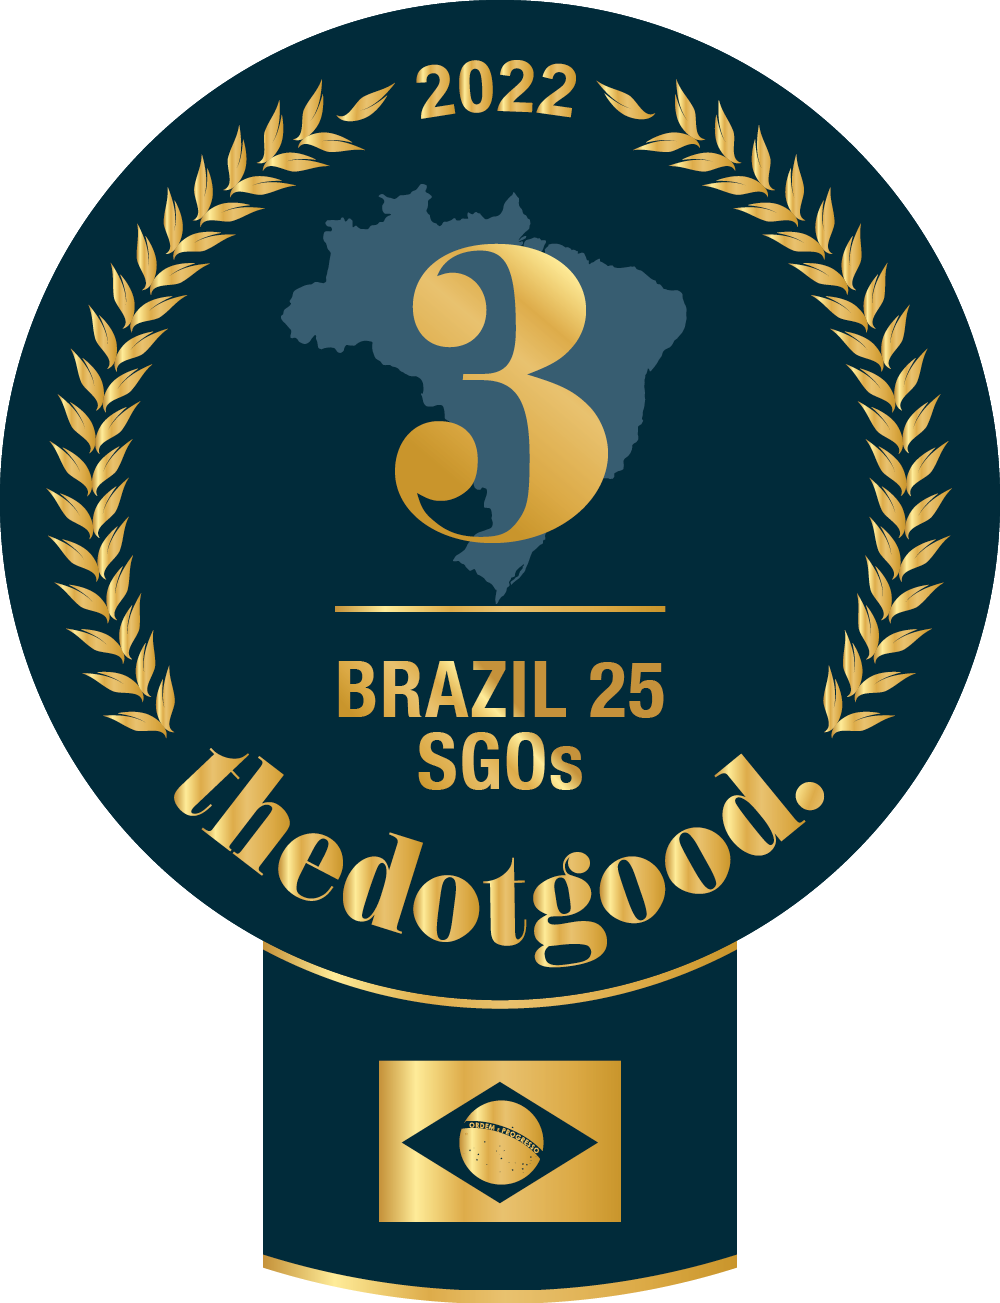 REDE CIDADA is brazil ranked on thedotgood.